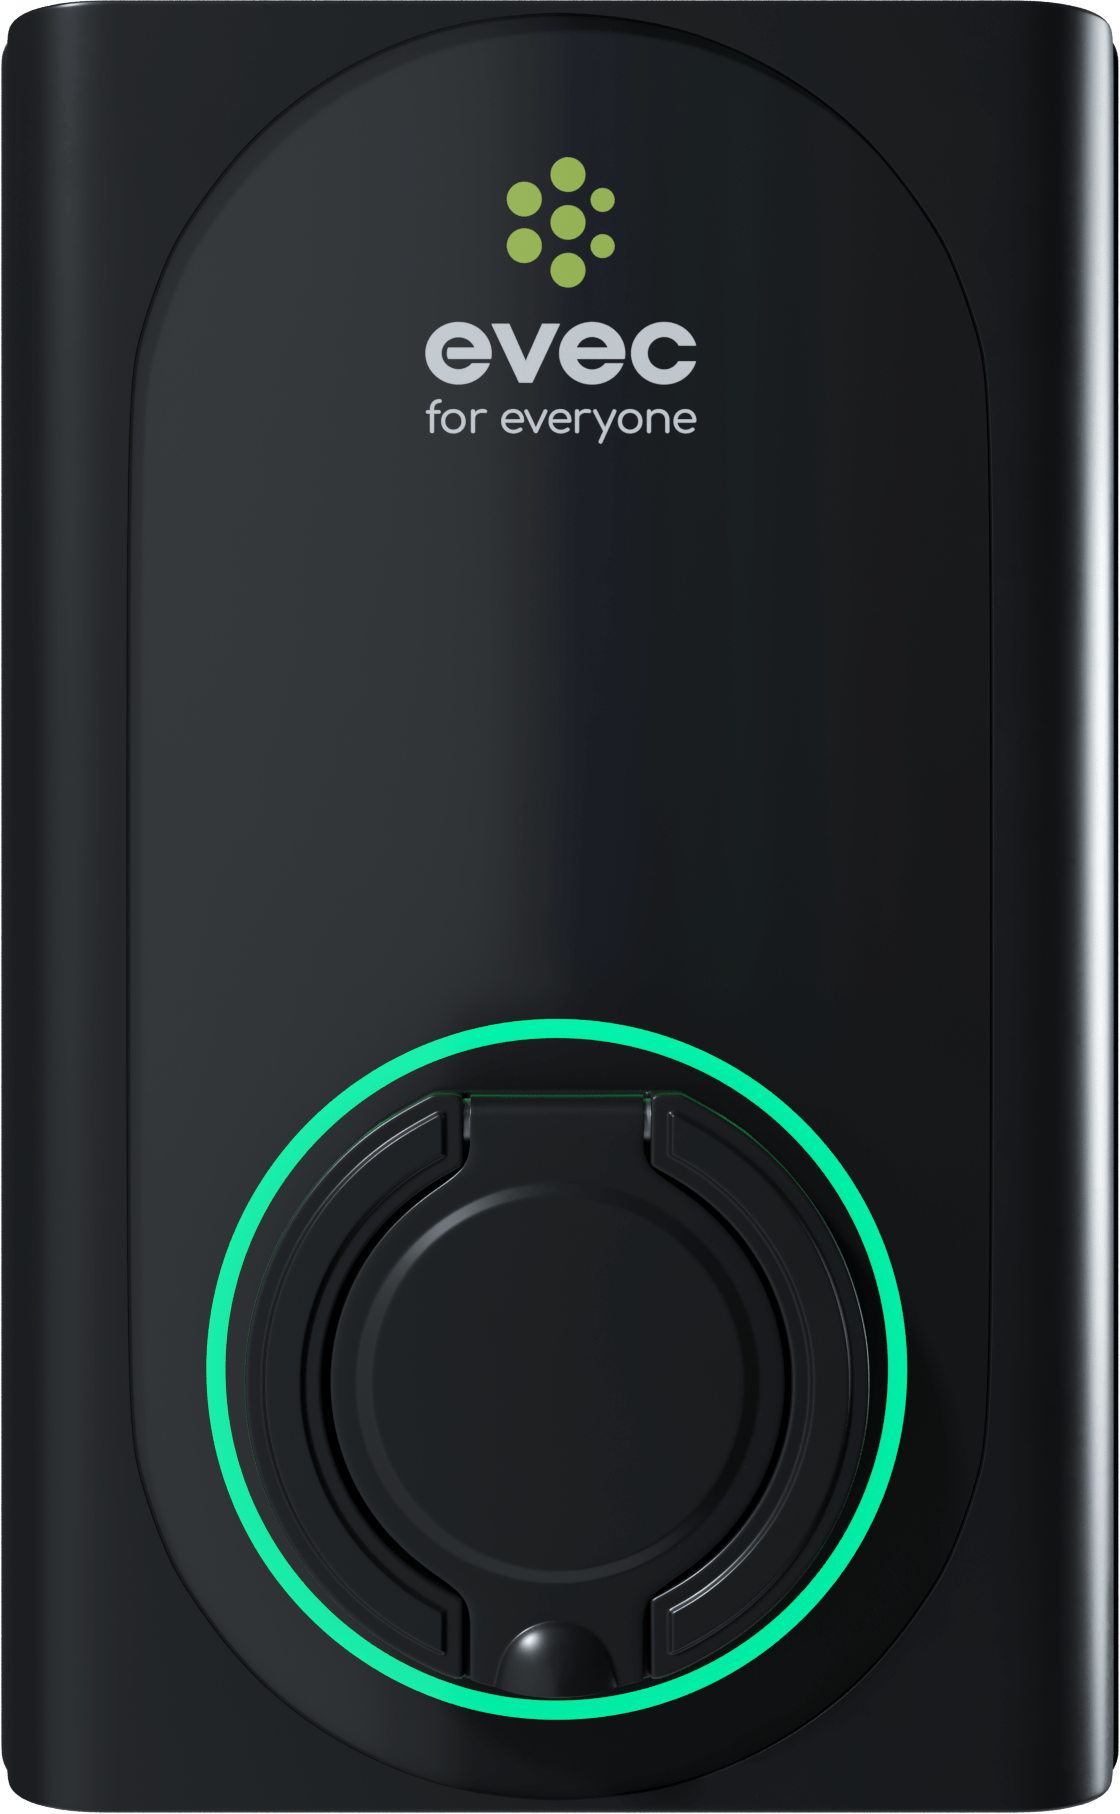 EVEC EV Charger, 22kW, Socketed